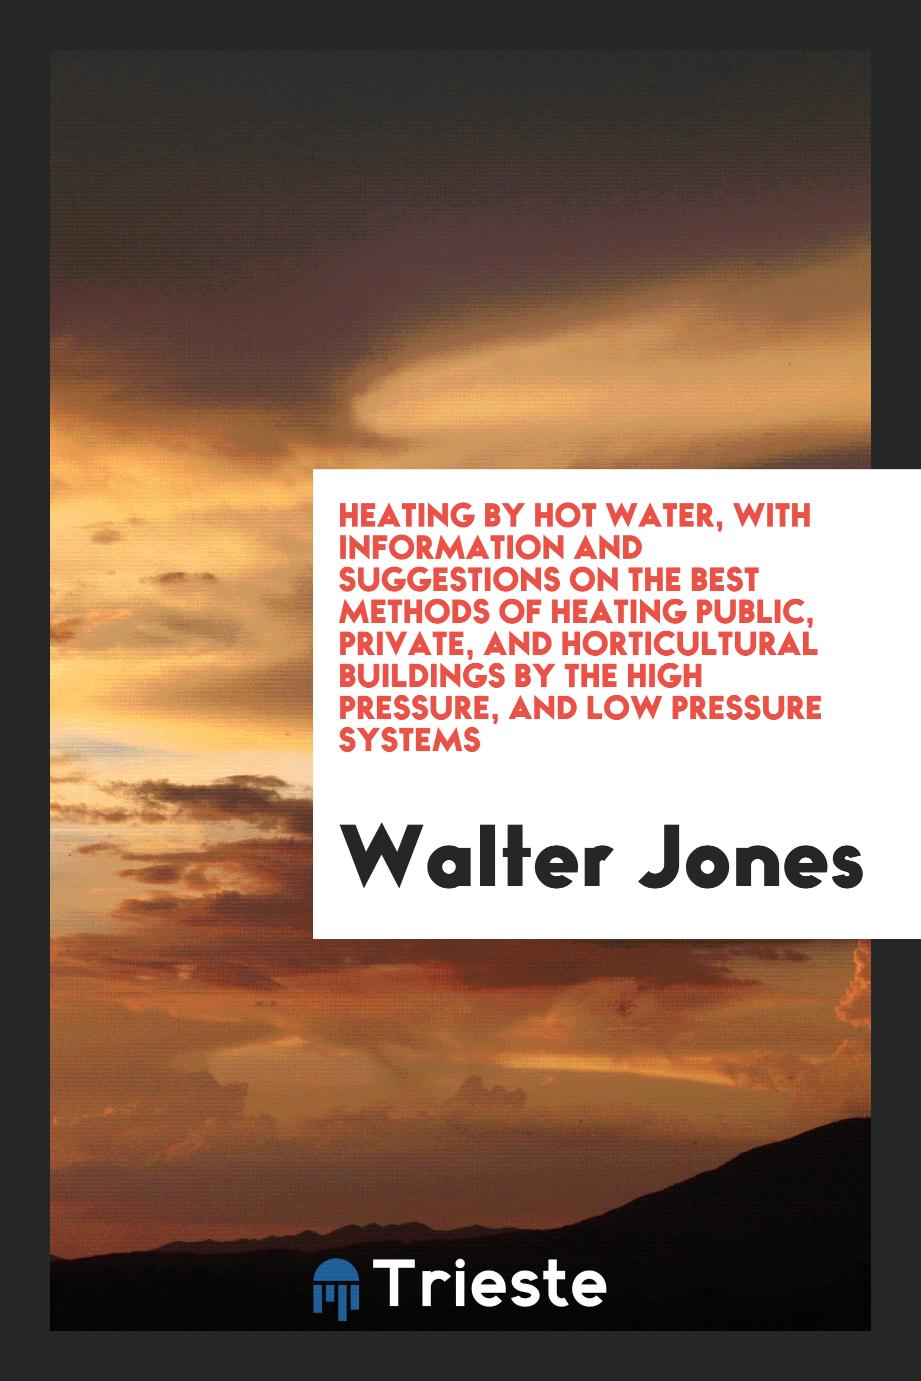 Heating by Hot Water, with Information and Suggestions on the Best Methods of Heating Public, Private, and Horticultural Buildings by the High Pressure, and Low Pressure Systems